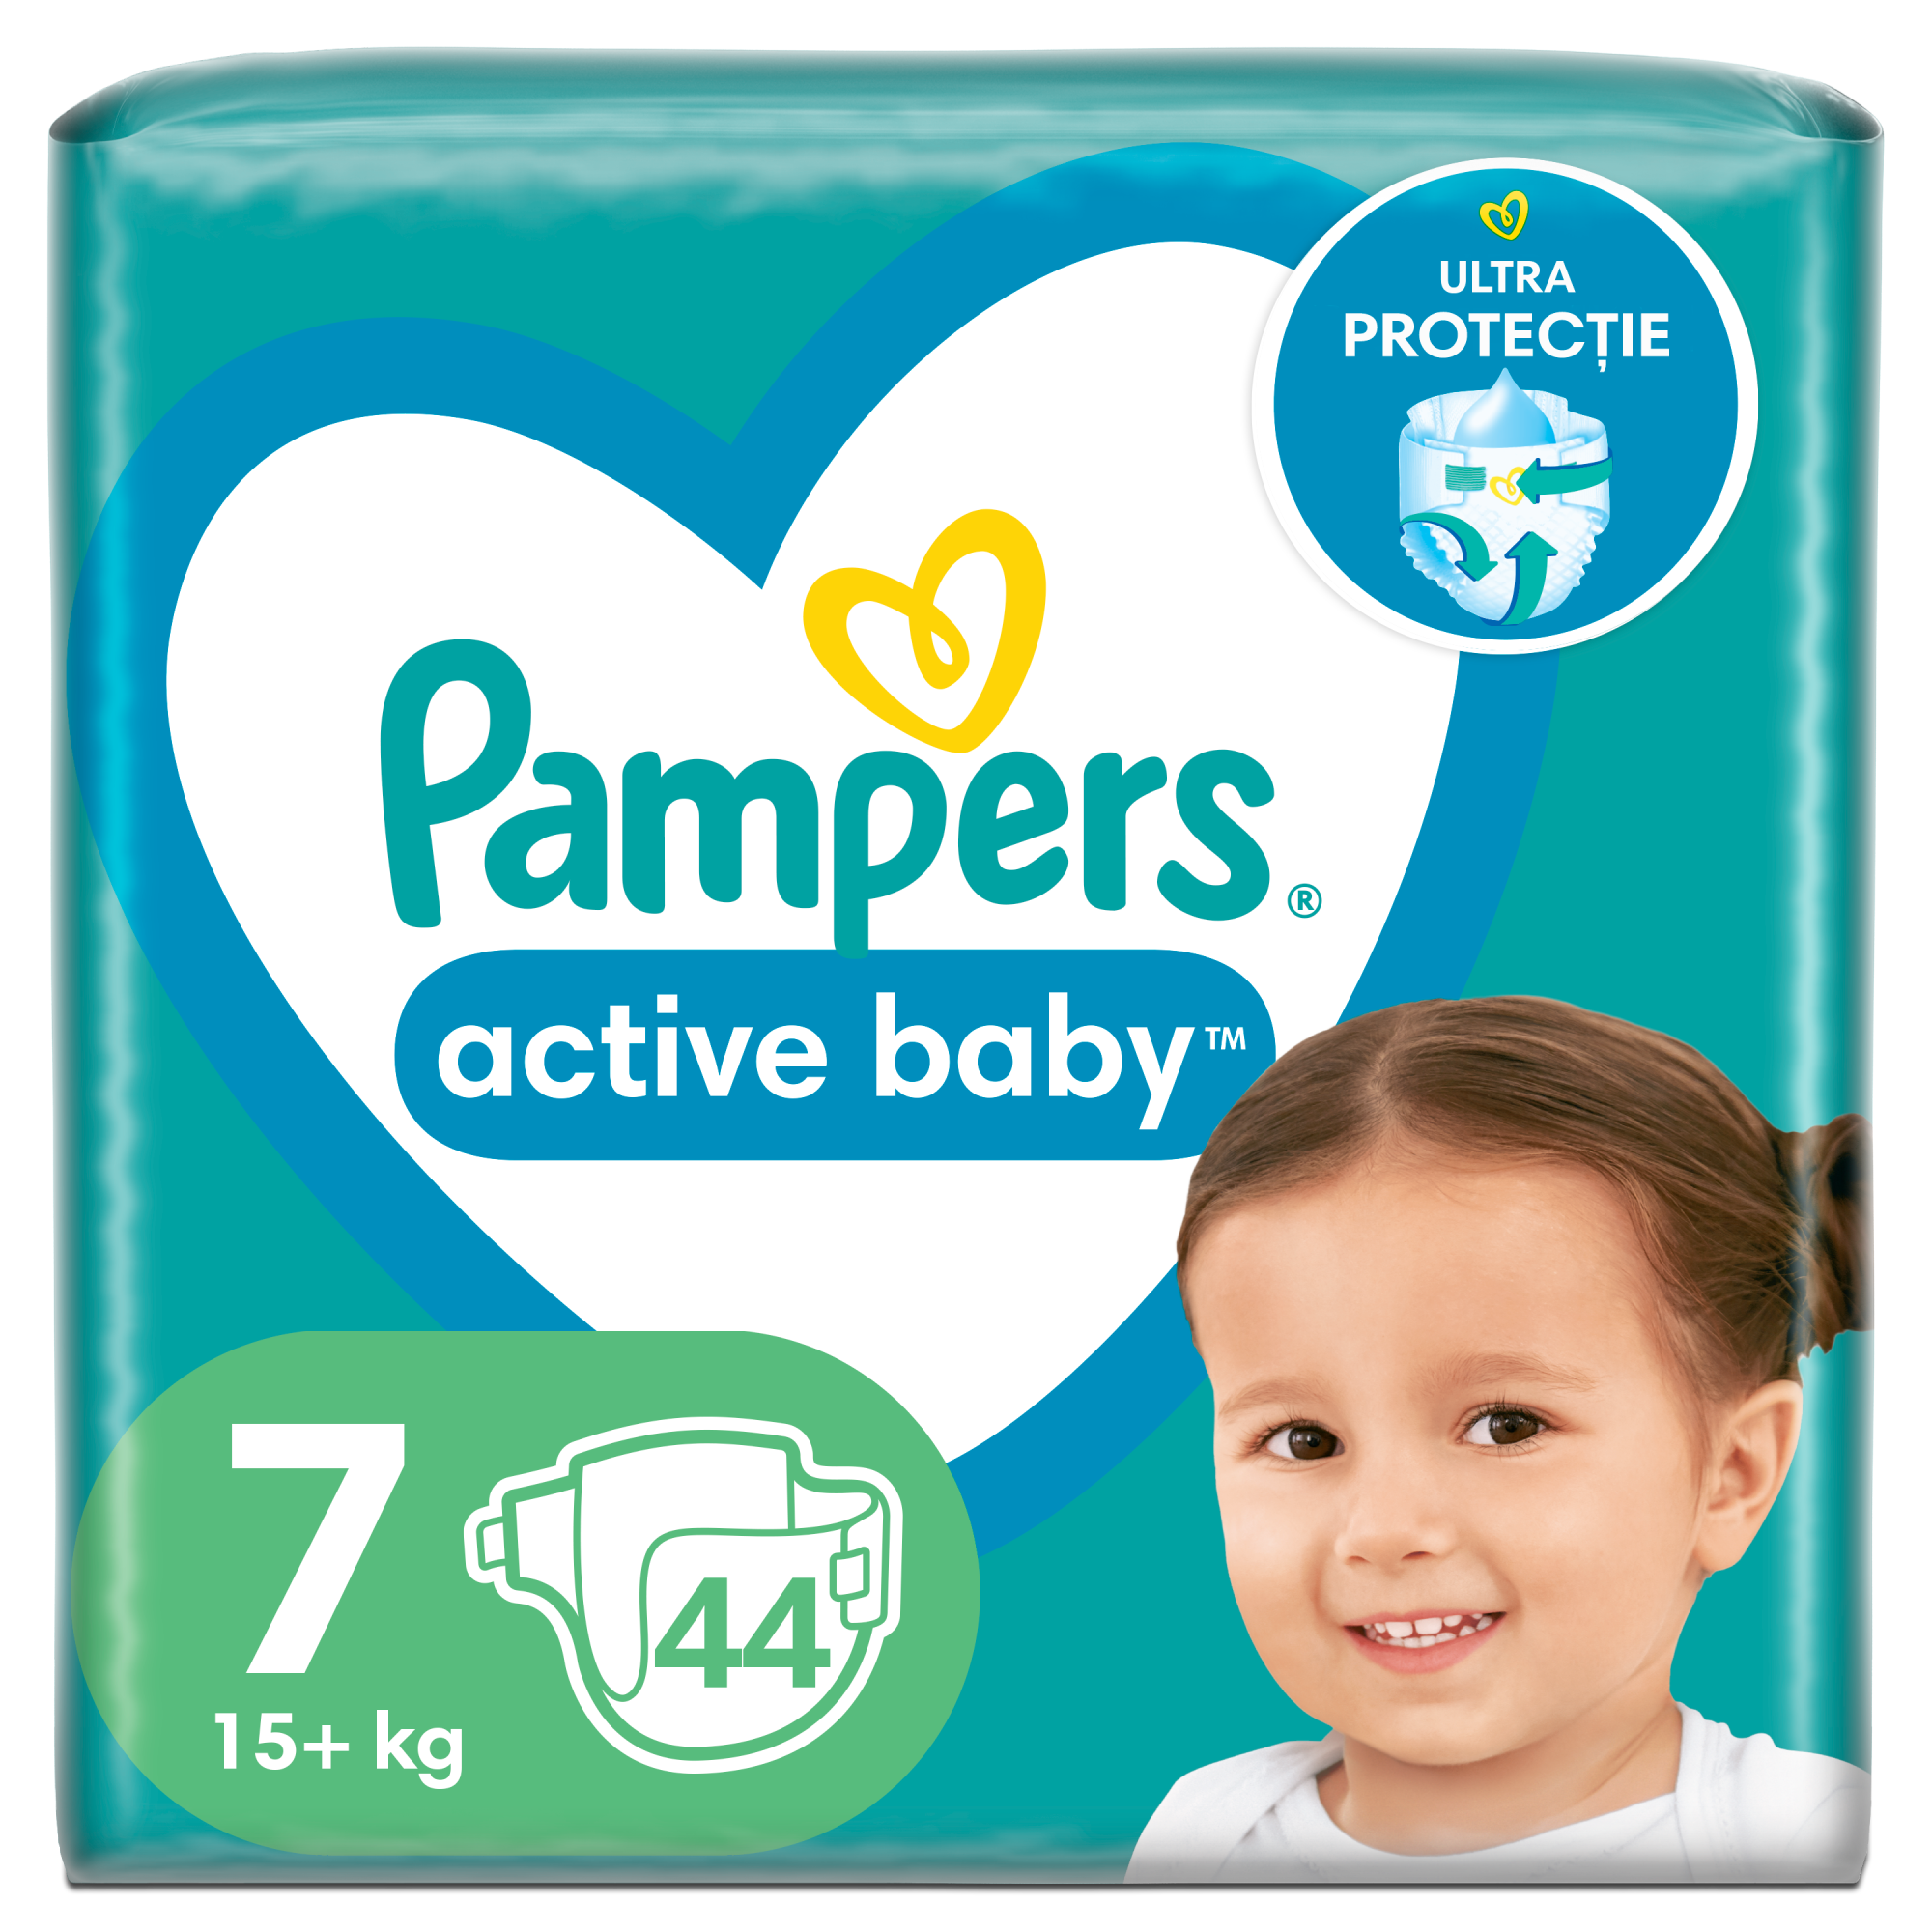 Pampers Active Baby Pants Size 7 - 35 S Jumbo Pack - 293940